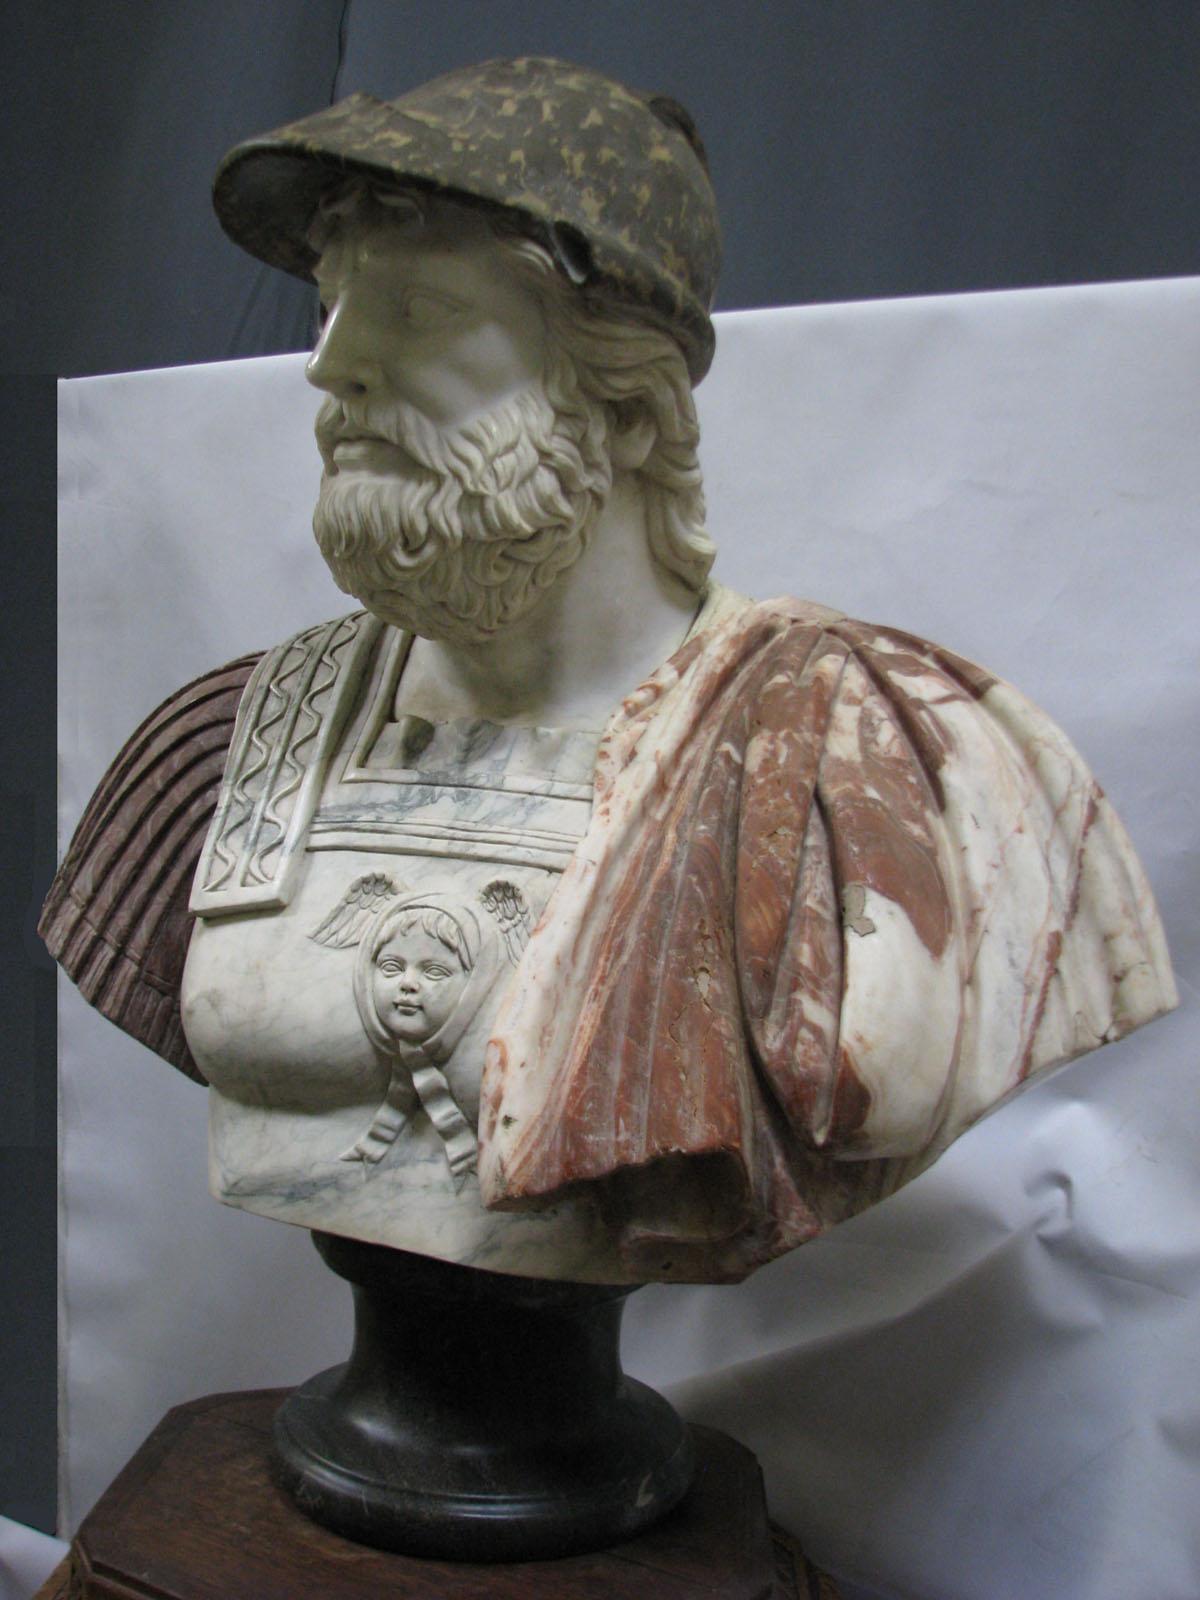 Impressive dimensions, prestigious and representative sculpture,
depicting the bust of an ancient leader in a parade helmet,
made in so-called natural dimensions, in 5 types (colors) of marble.
 
Marble busts of this size were extremely rare in